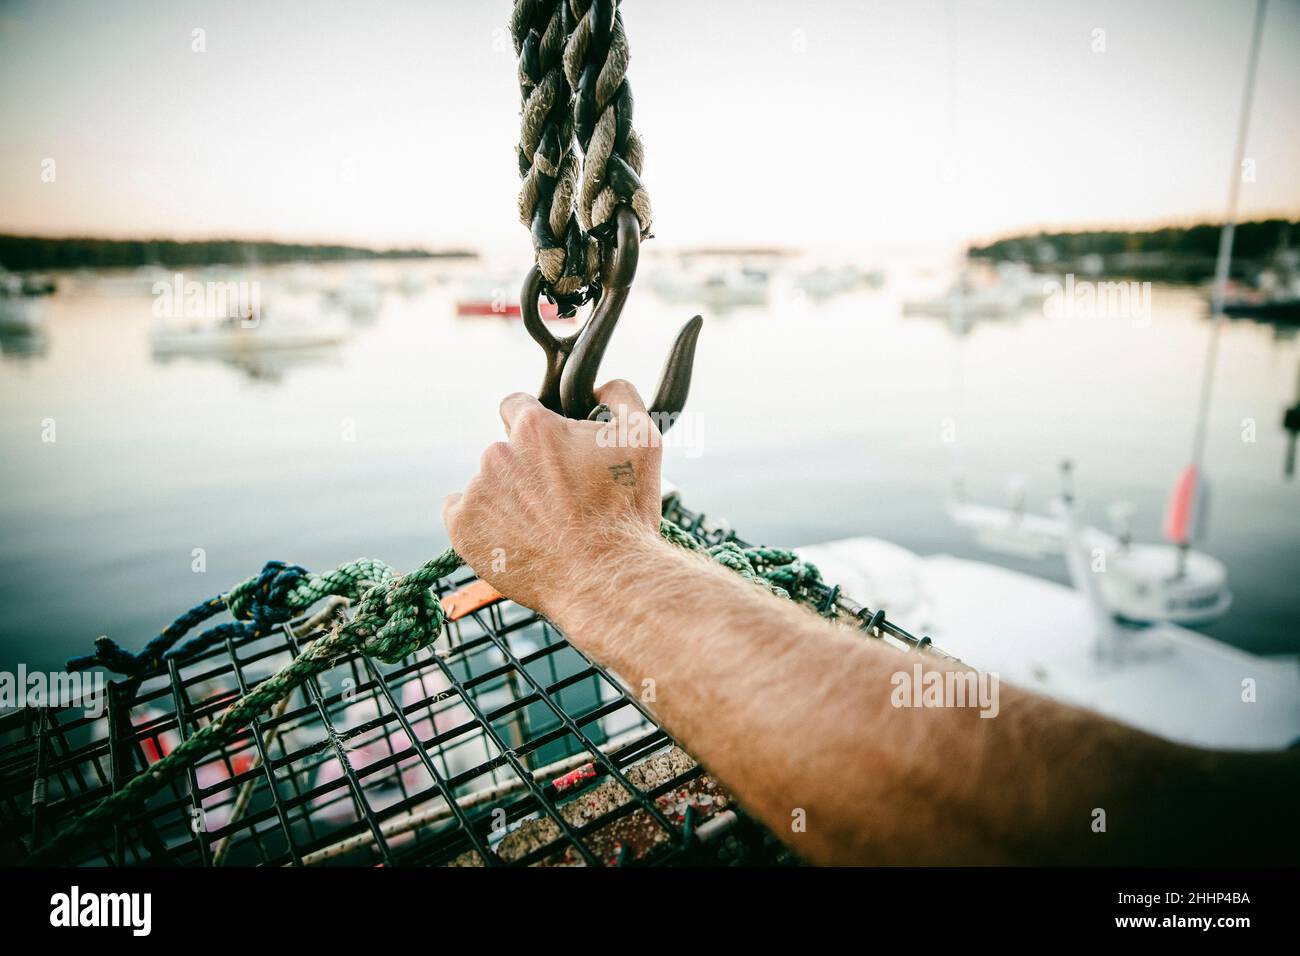 Lobster fisherman holding a lobster cage on a boat in Owl's Head, Maine Stock Photo